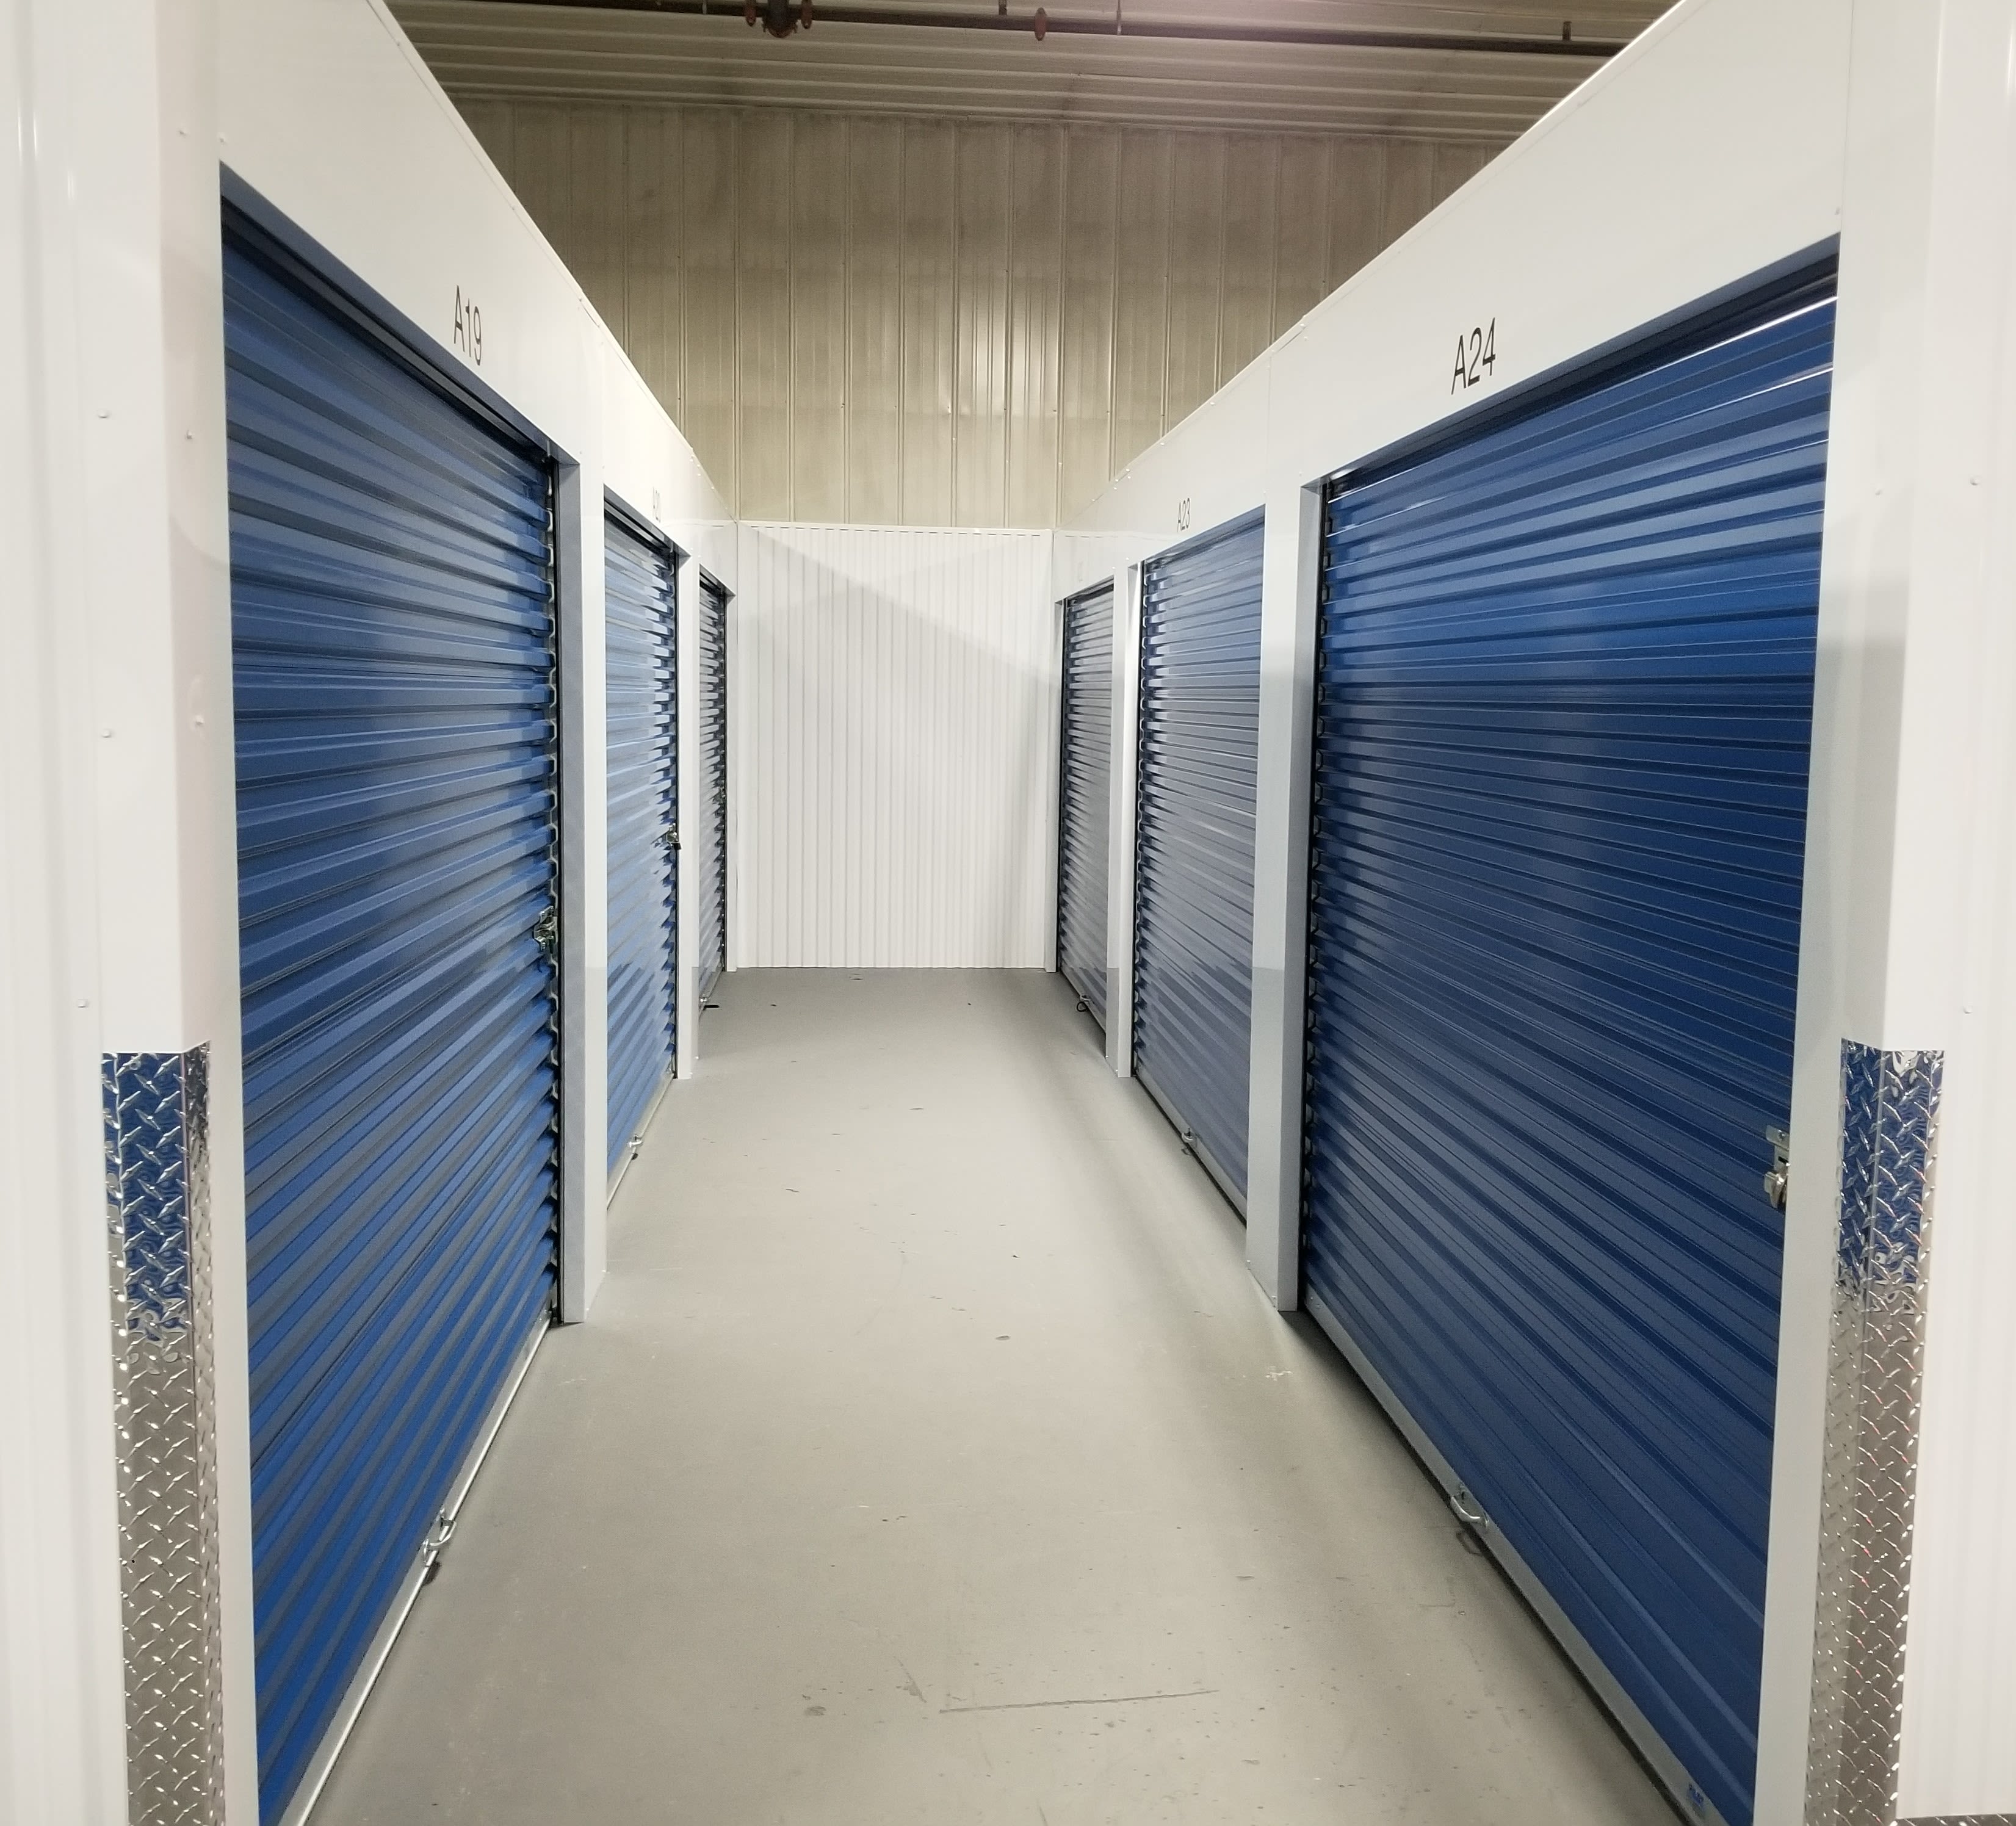 Learn more about features at KO Storage in Maple Plain, Minnesota